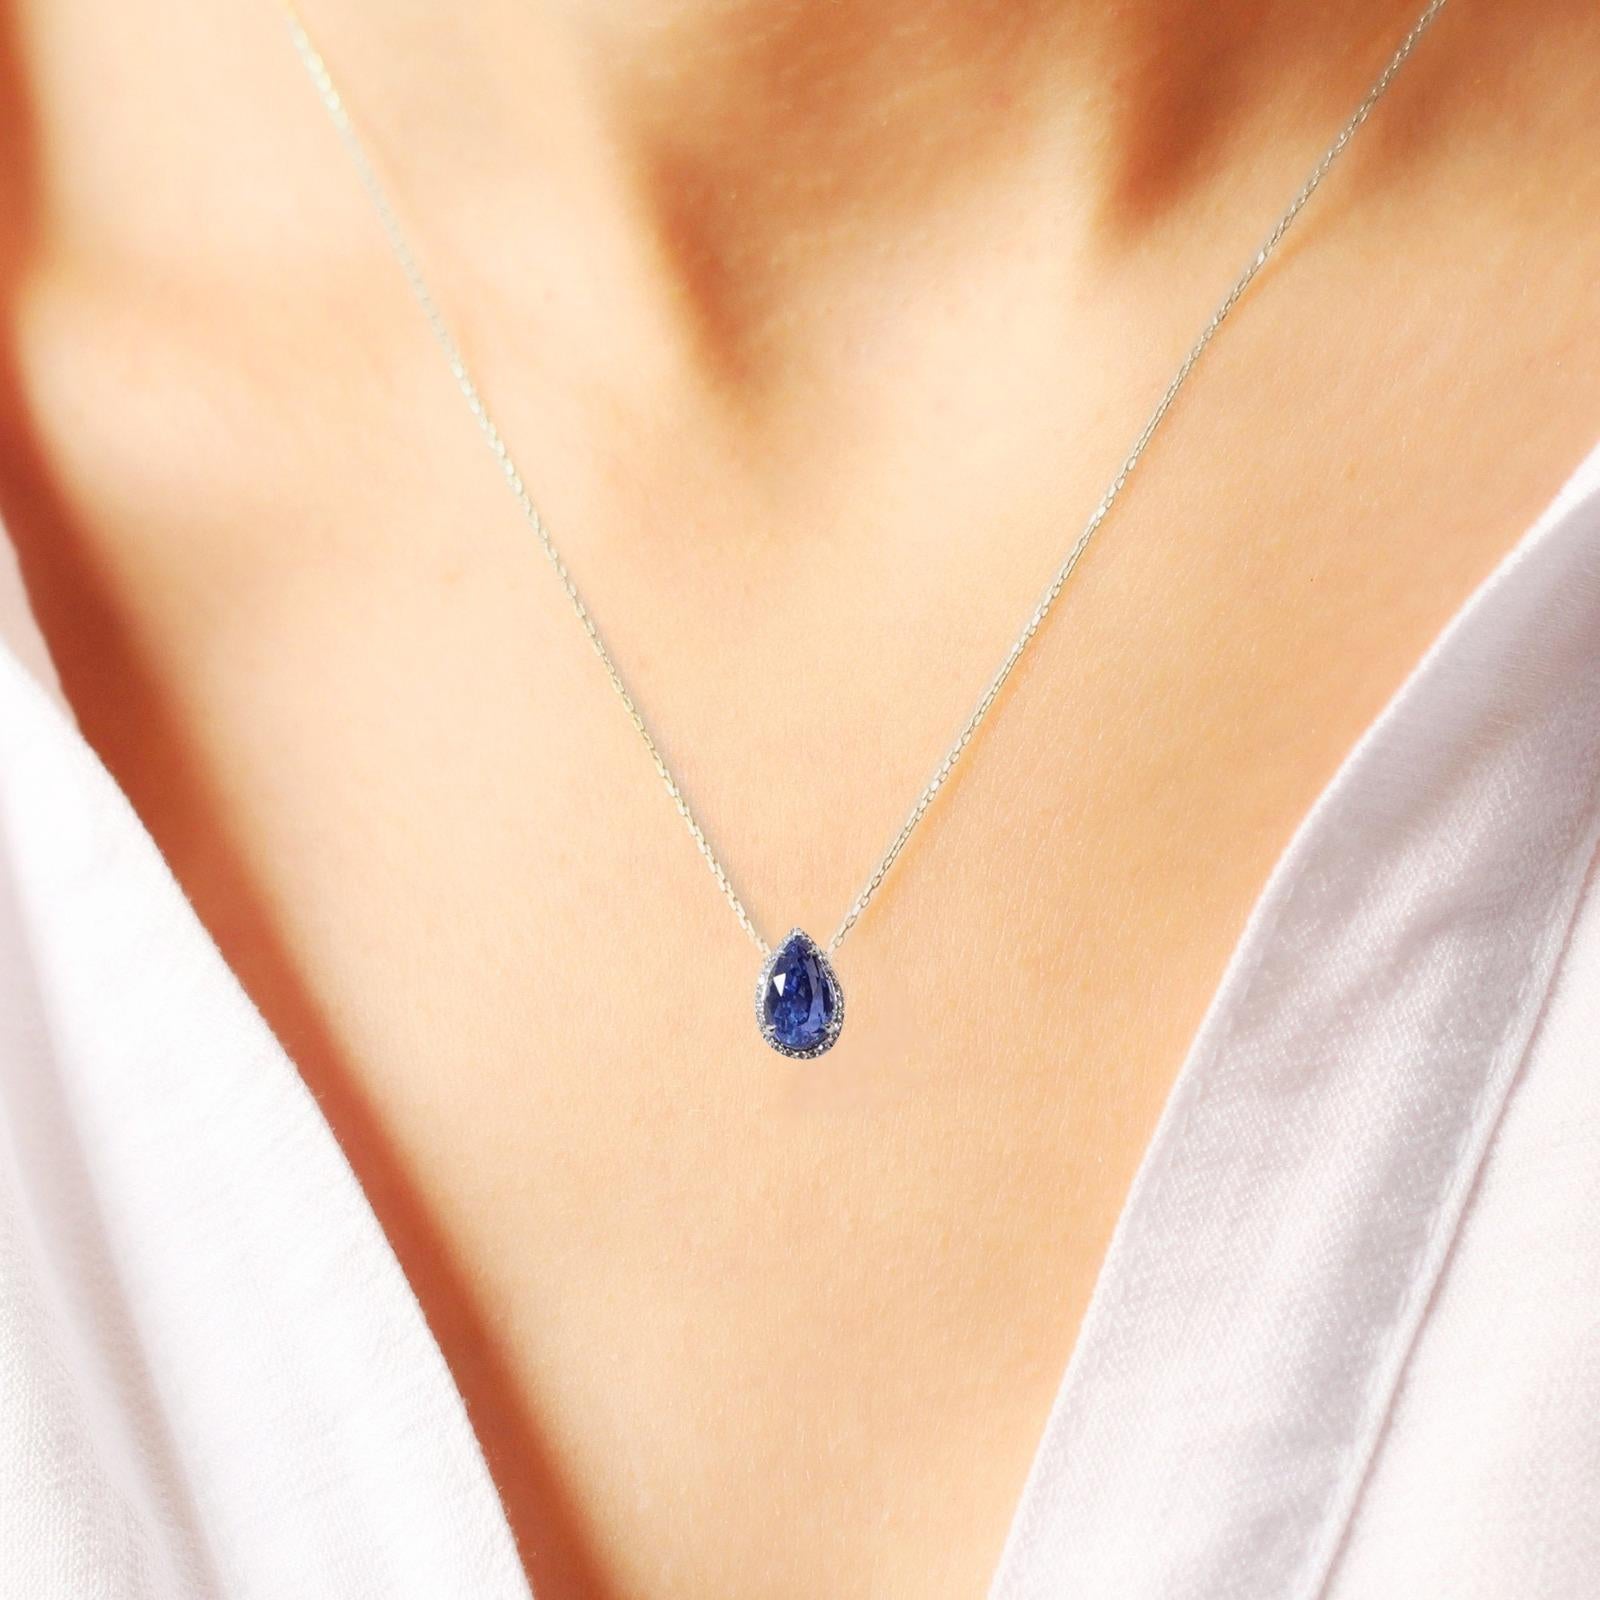 Pear Cut 18K White Gold Necklace With Sapphire 2.82 ct. For Sale